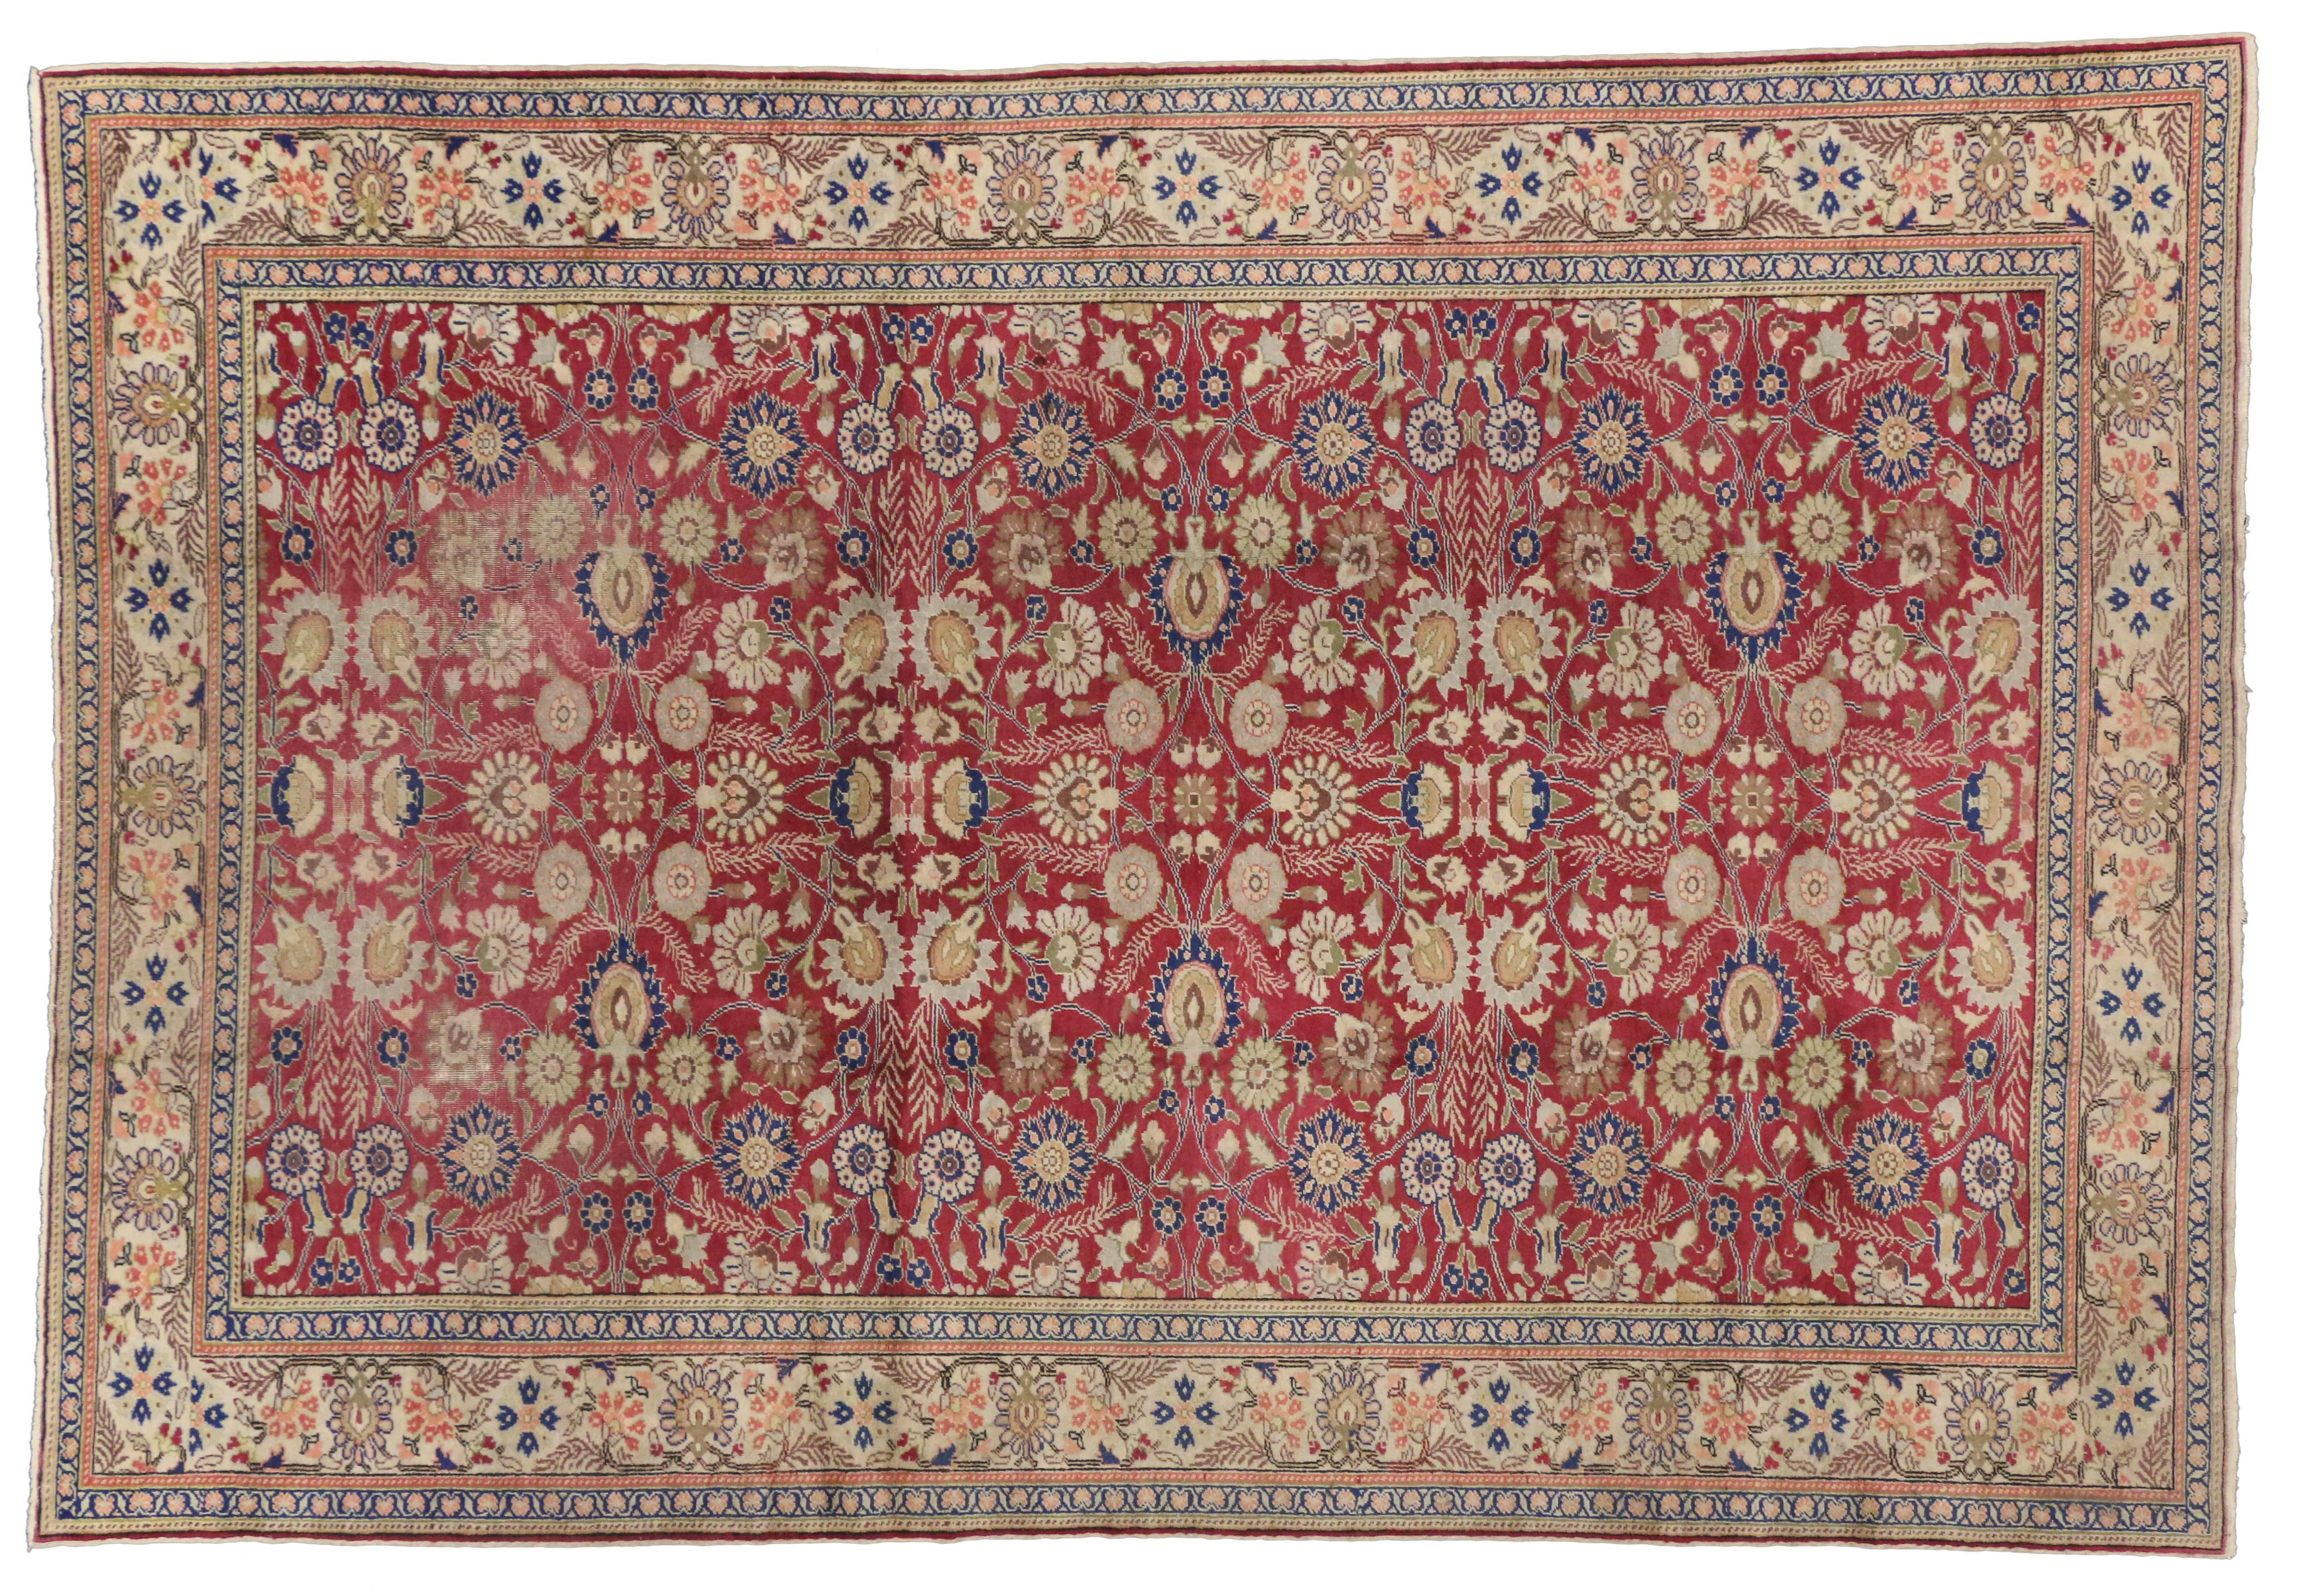 Antique Turkish Sivas Rug with All-Over Floral Motif In Good Condition For Sale In Dallas, TX